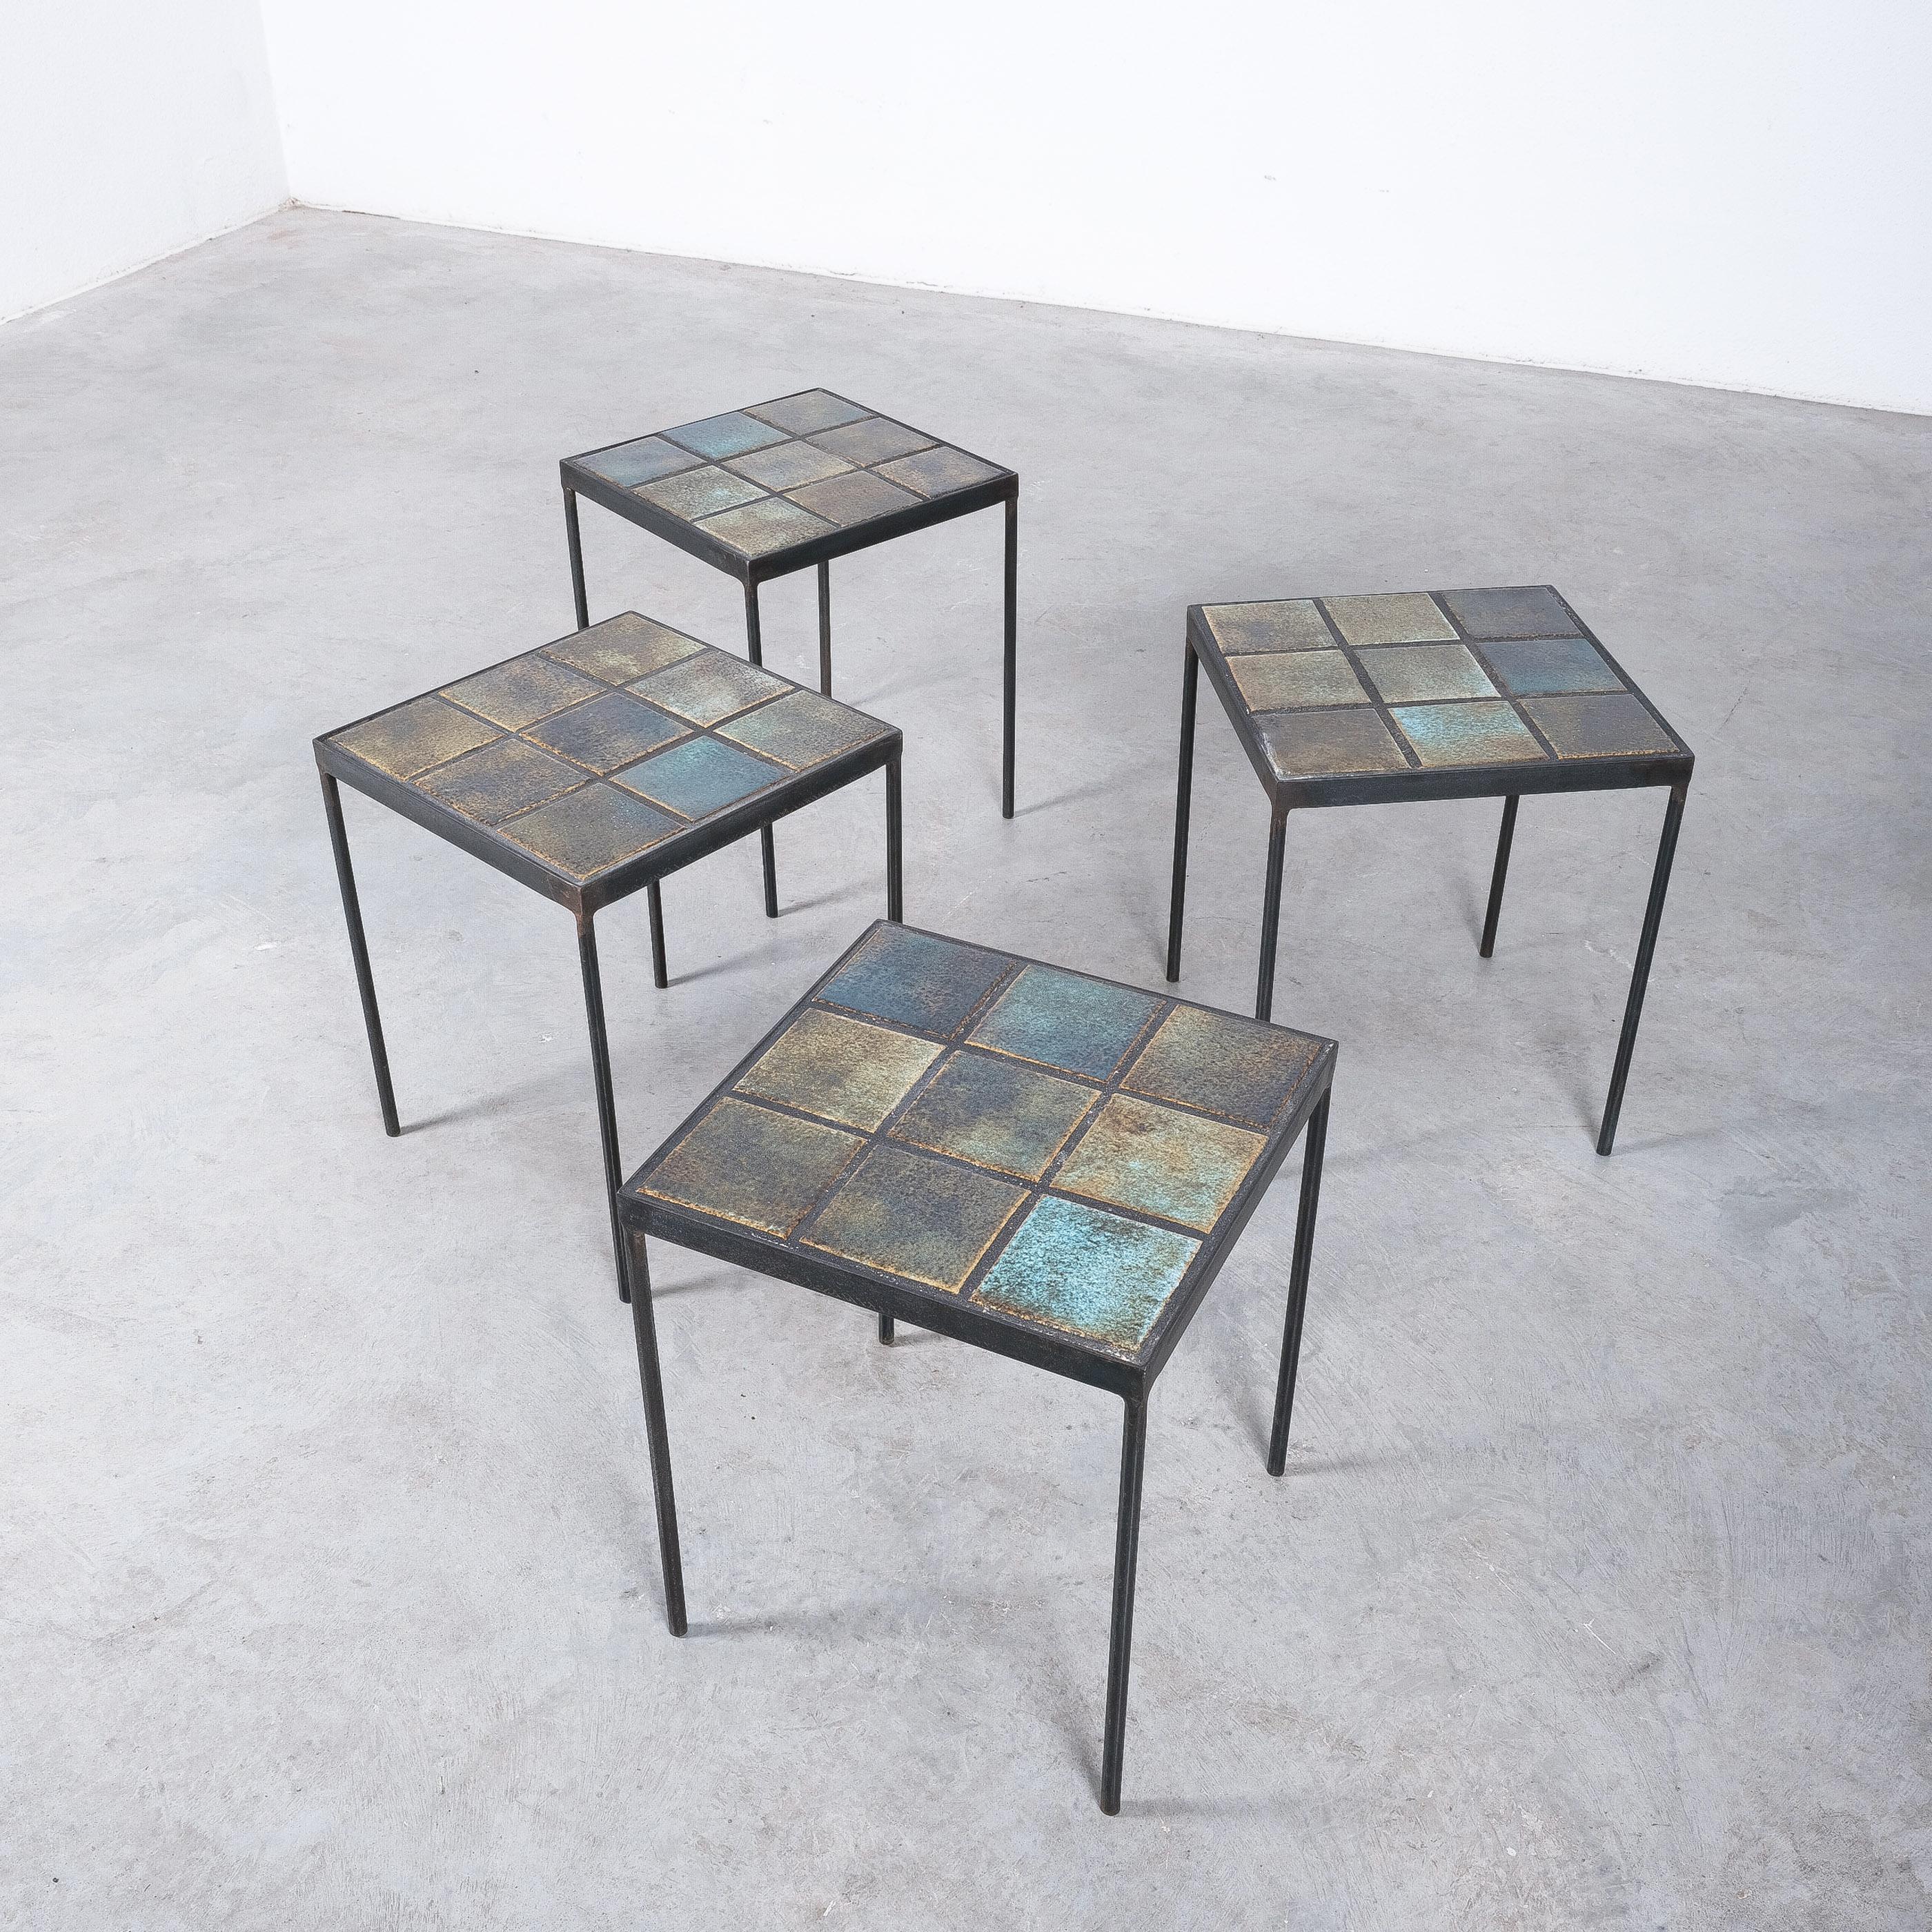 Ceramic tables on blackened iron base, France circa 1970

We have priced them per pair, 2 pairs available.

A very well balanced set of gradient ceramic tiles tables in green, blue yellow tones. Unique set of tables with individual tones of